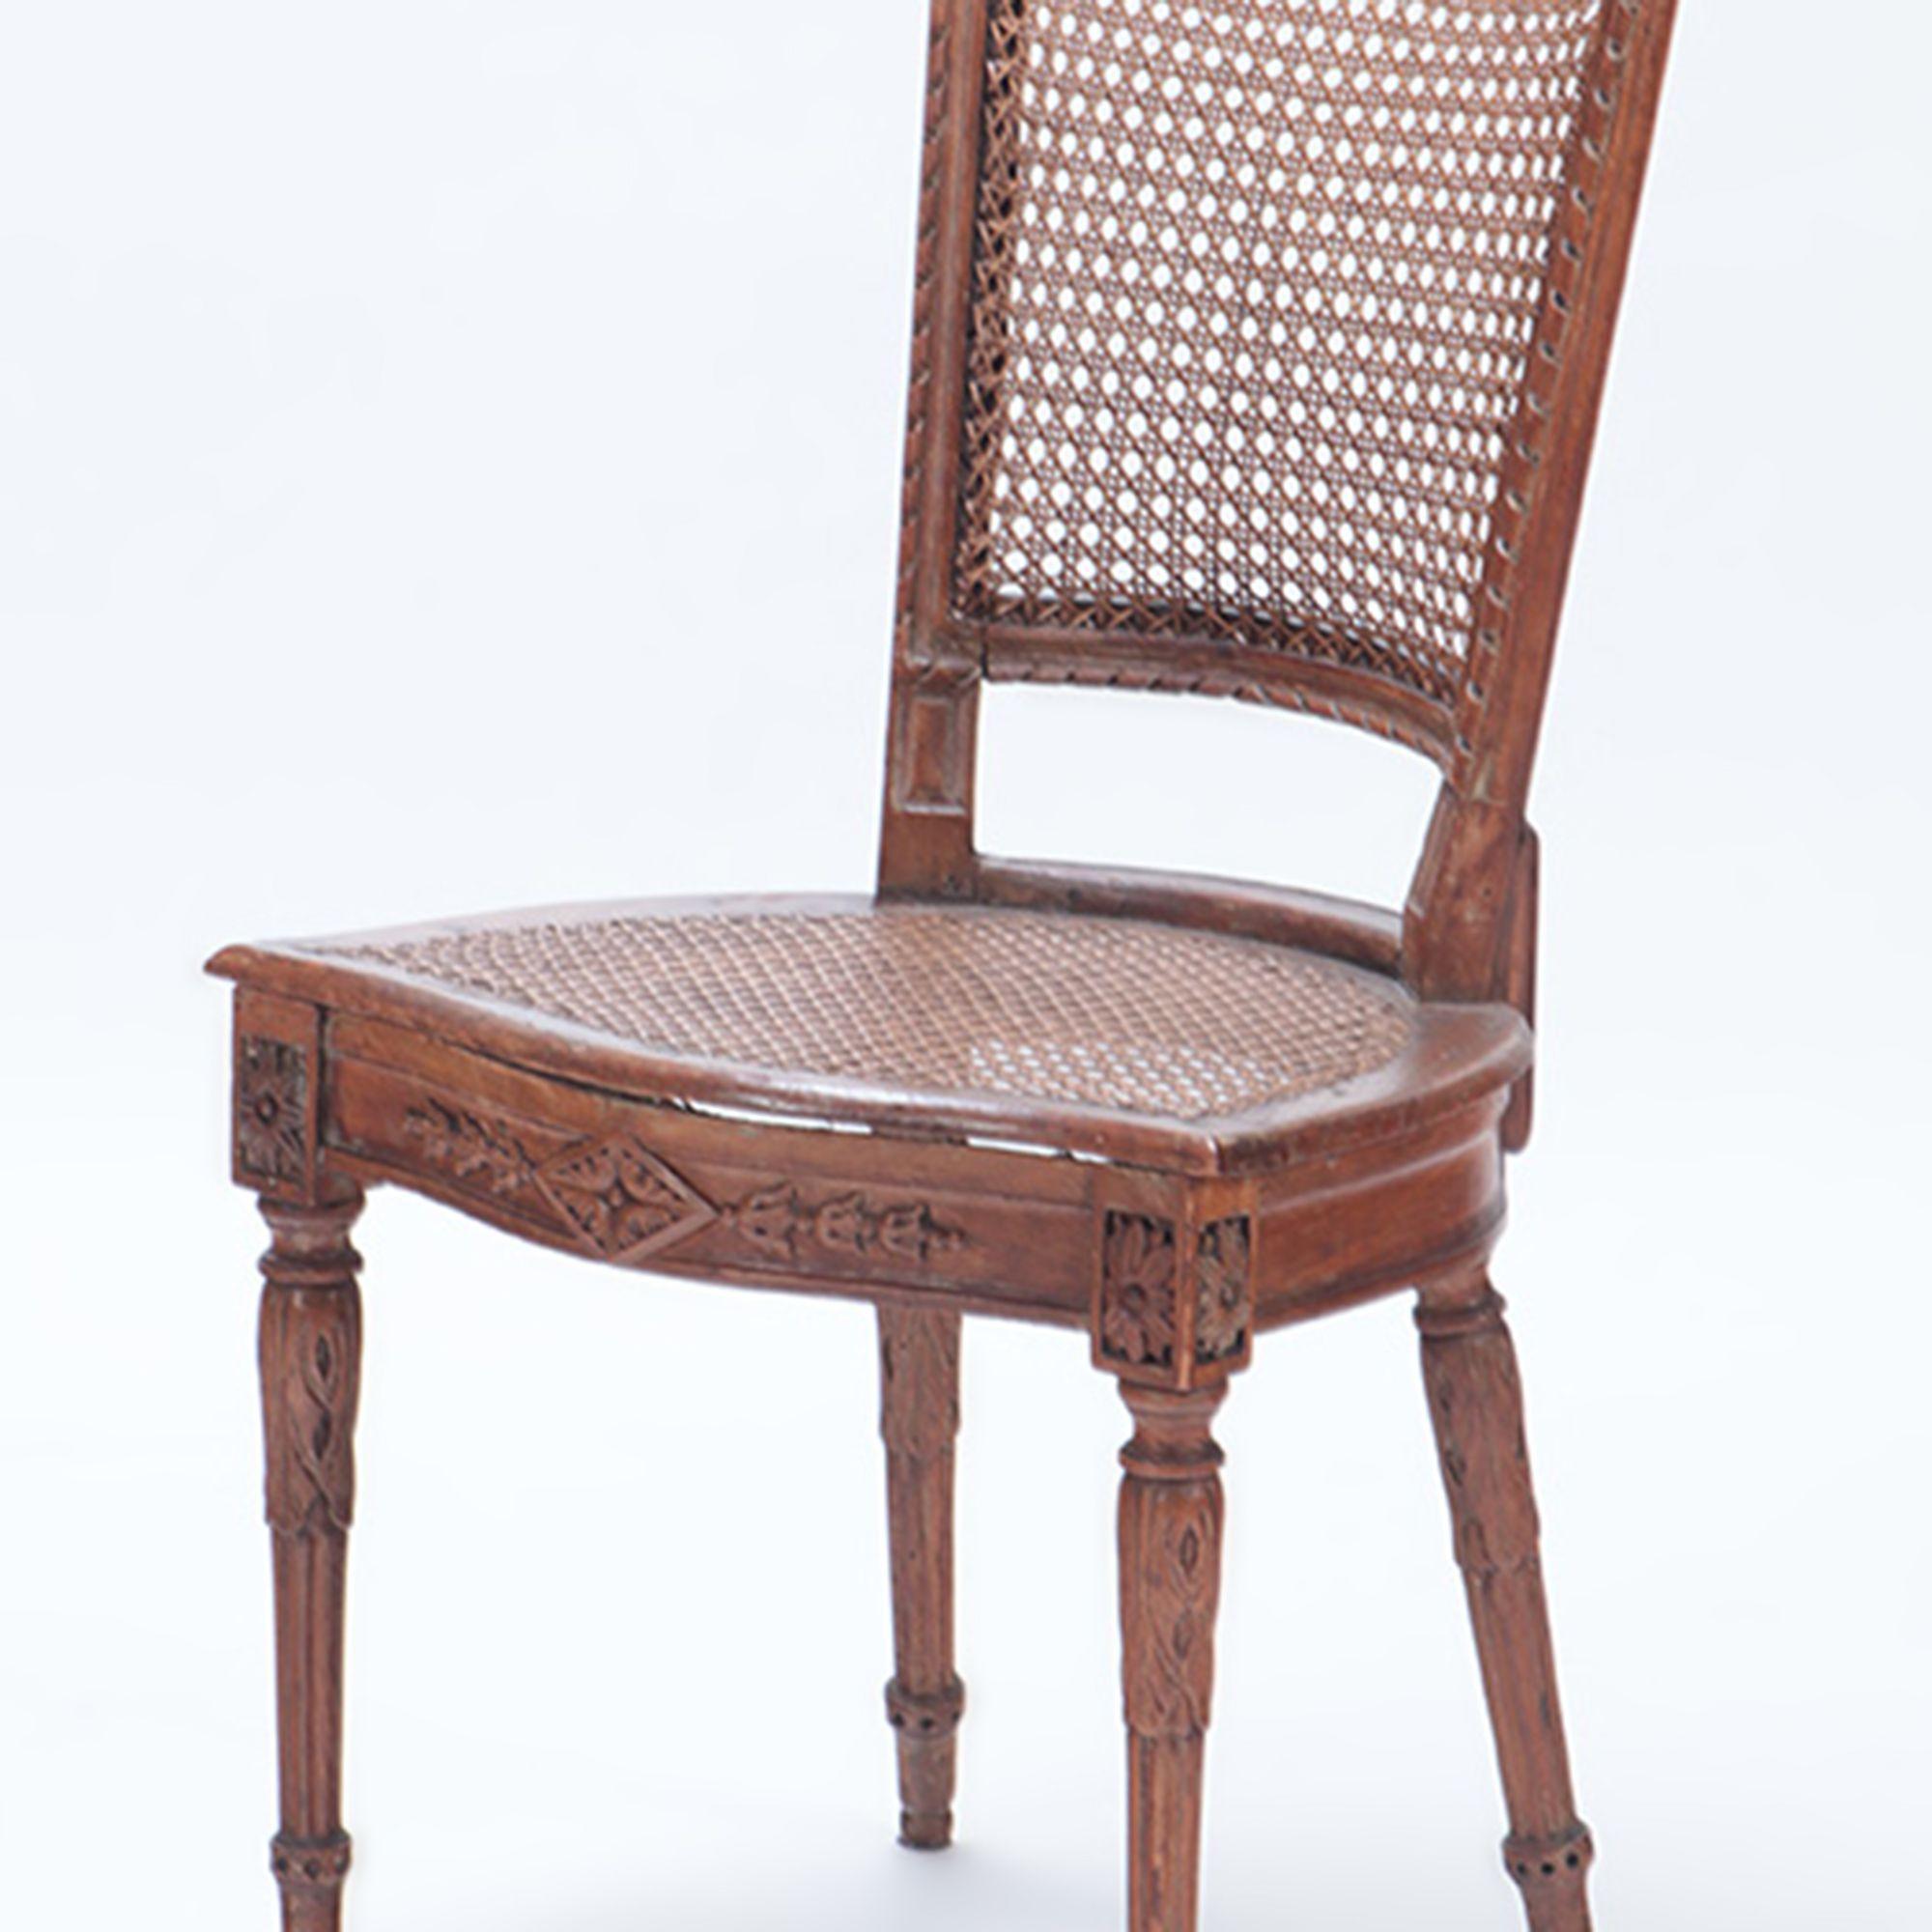 A set of Eight carved walnut and cane dining room chairs with loose cushions, tapering legs, early 19th century.